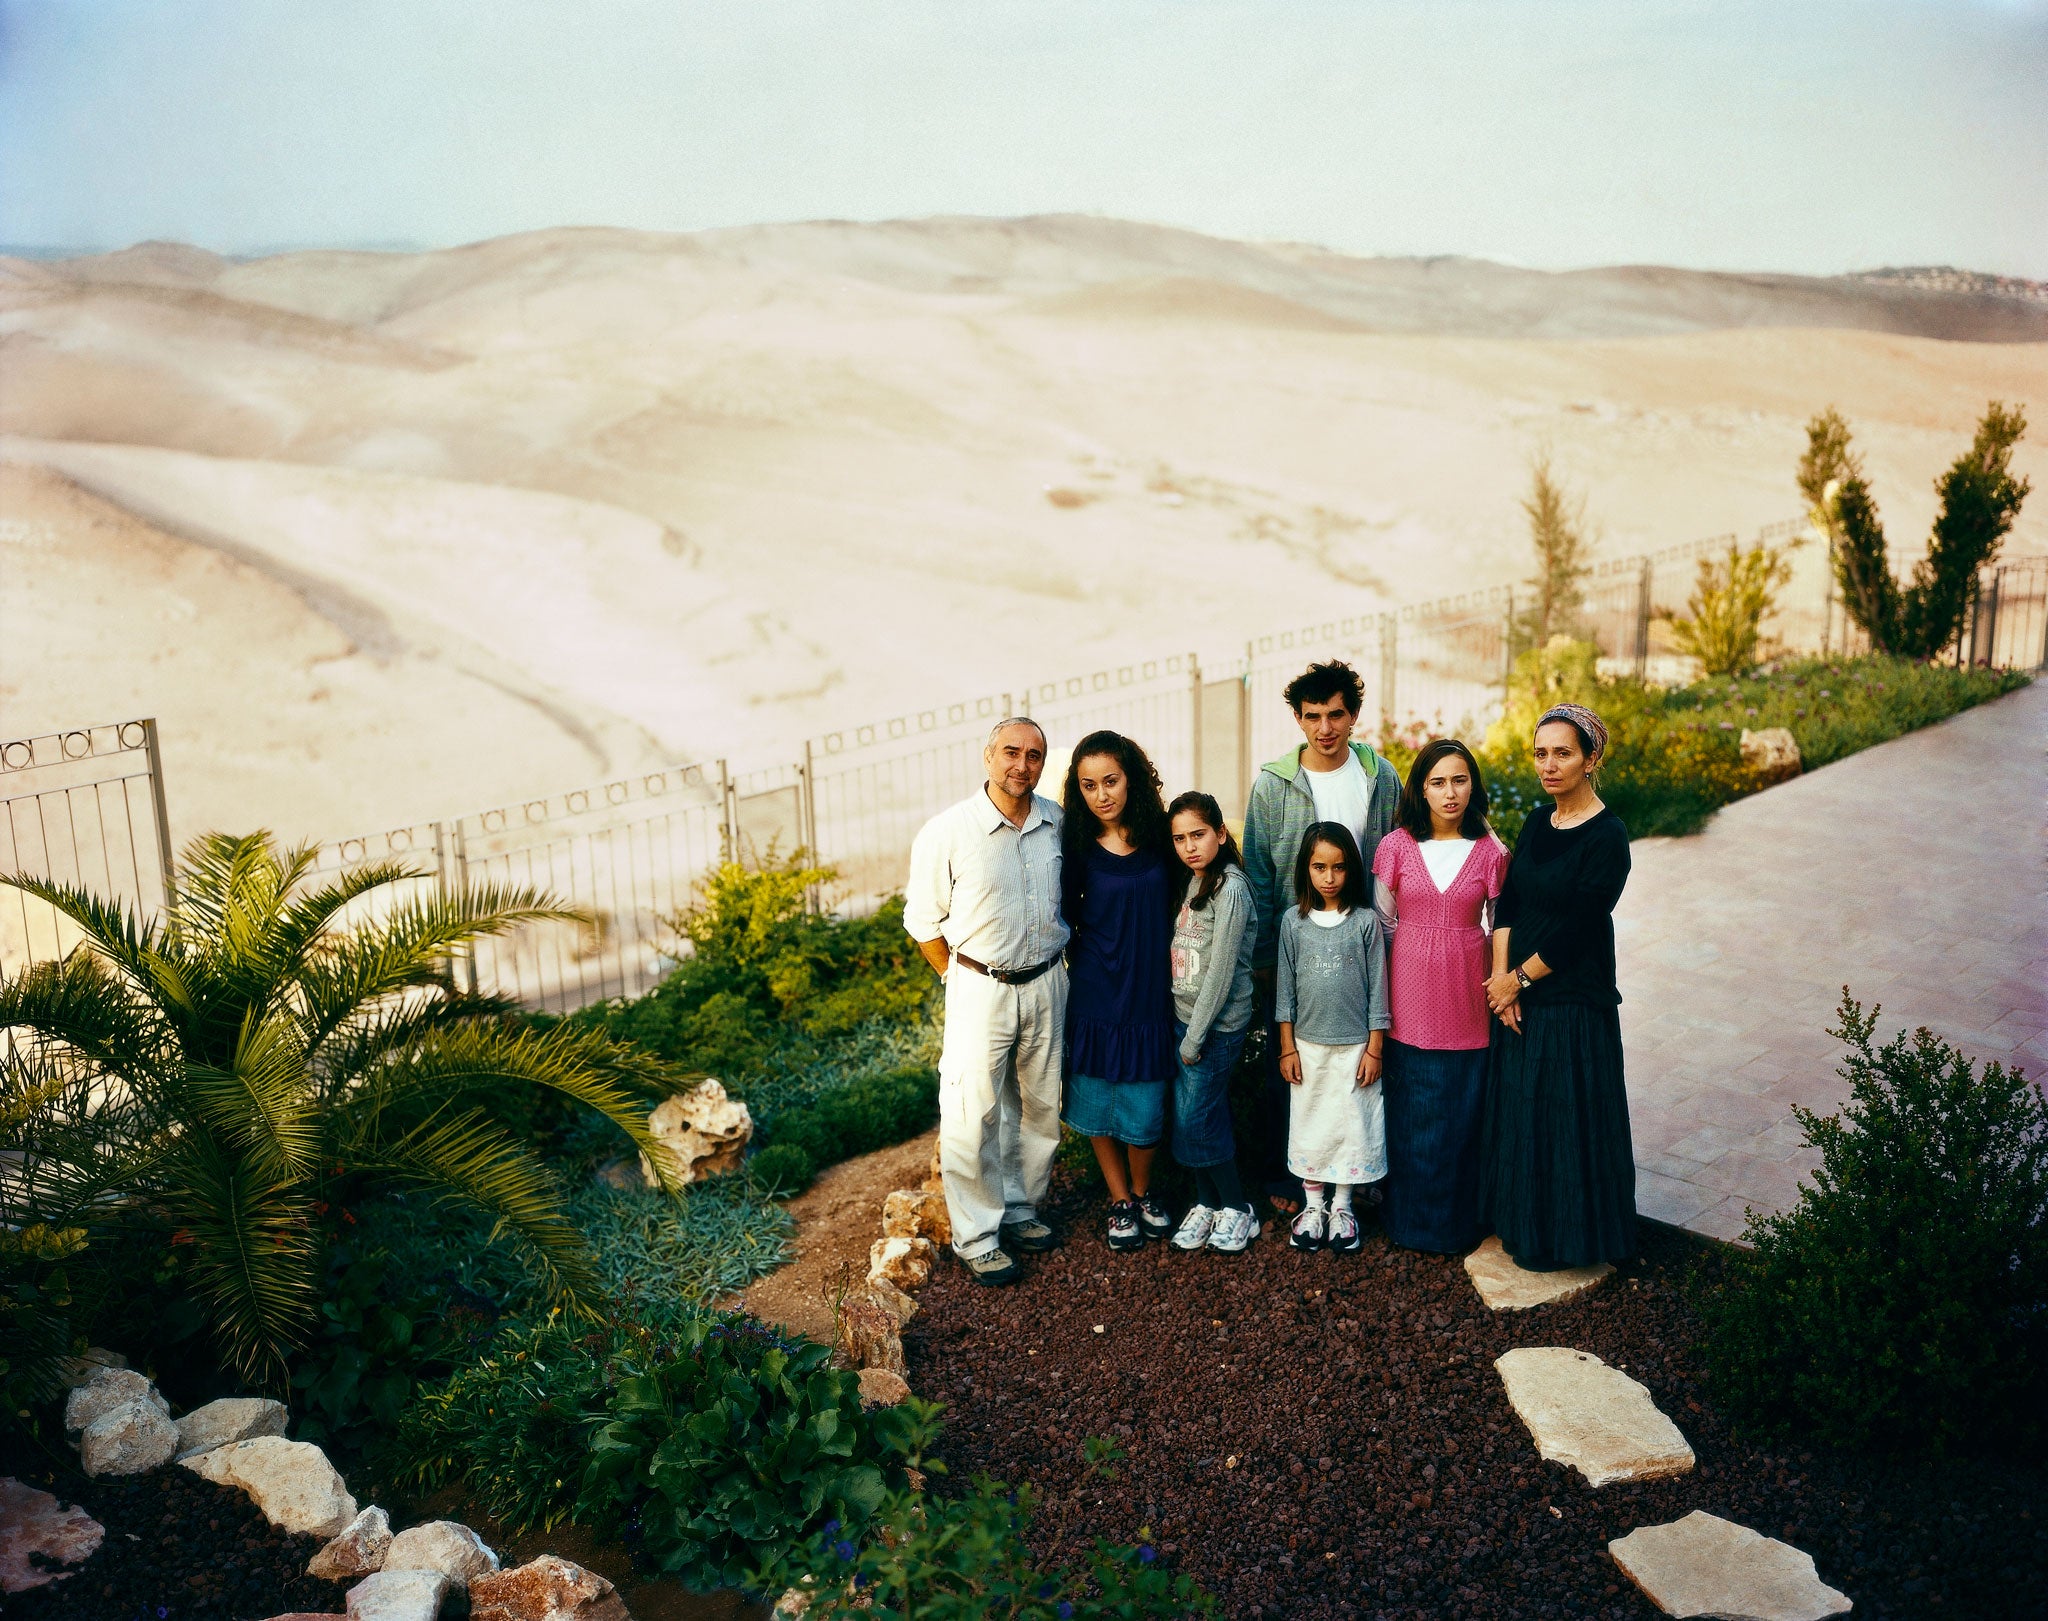 'Ma'ale Adumim is a settler city built at the entrance to the West Bank above Jerusalem on the edge of the desert,' says Waplington. 'This is an Australian family; they were secular [Jews] but they became orthodox'